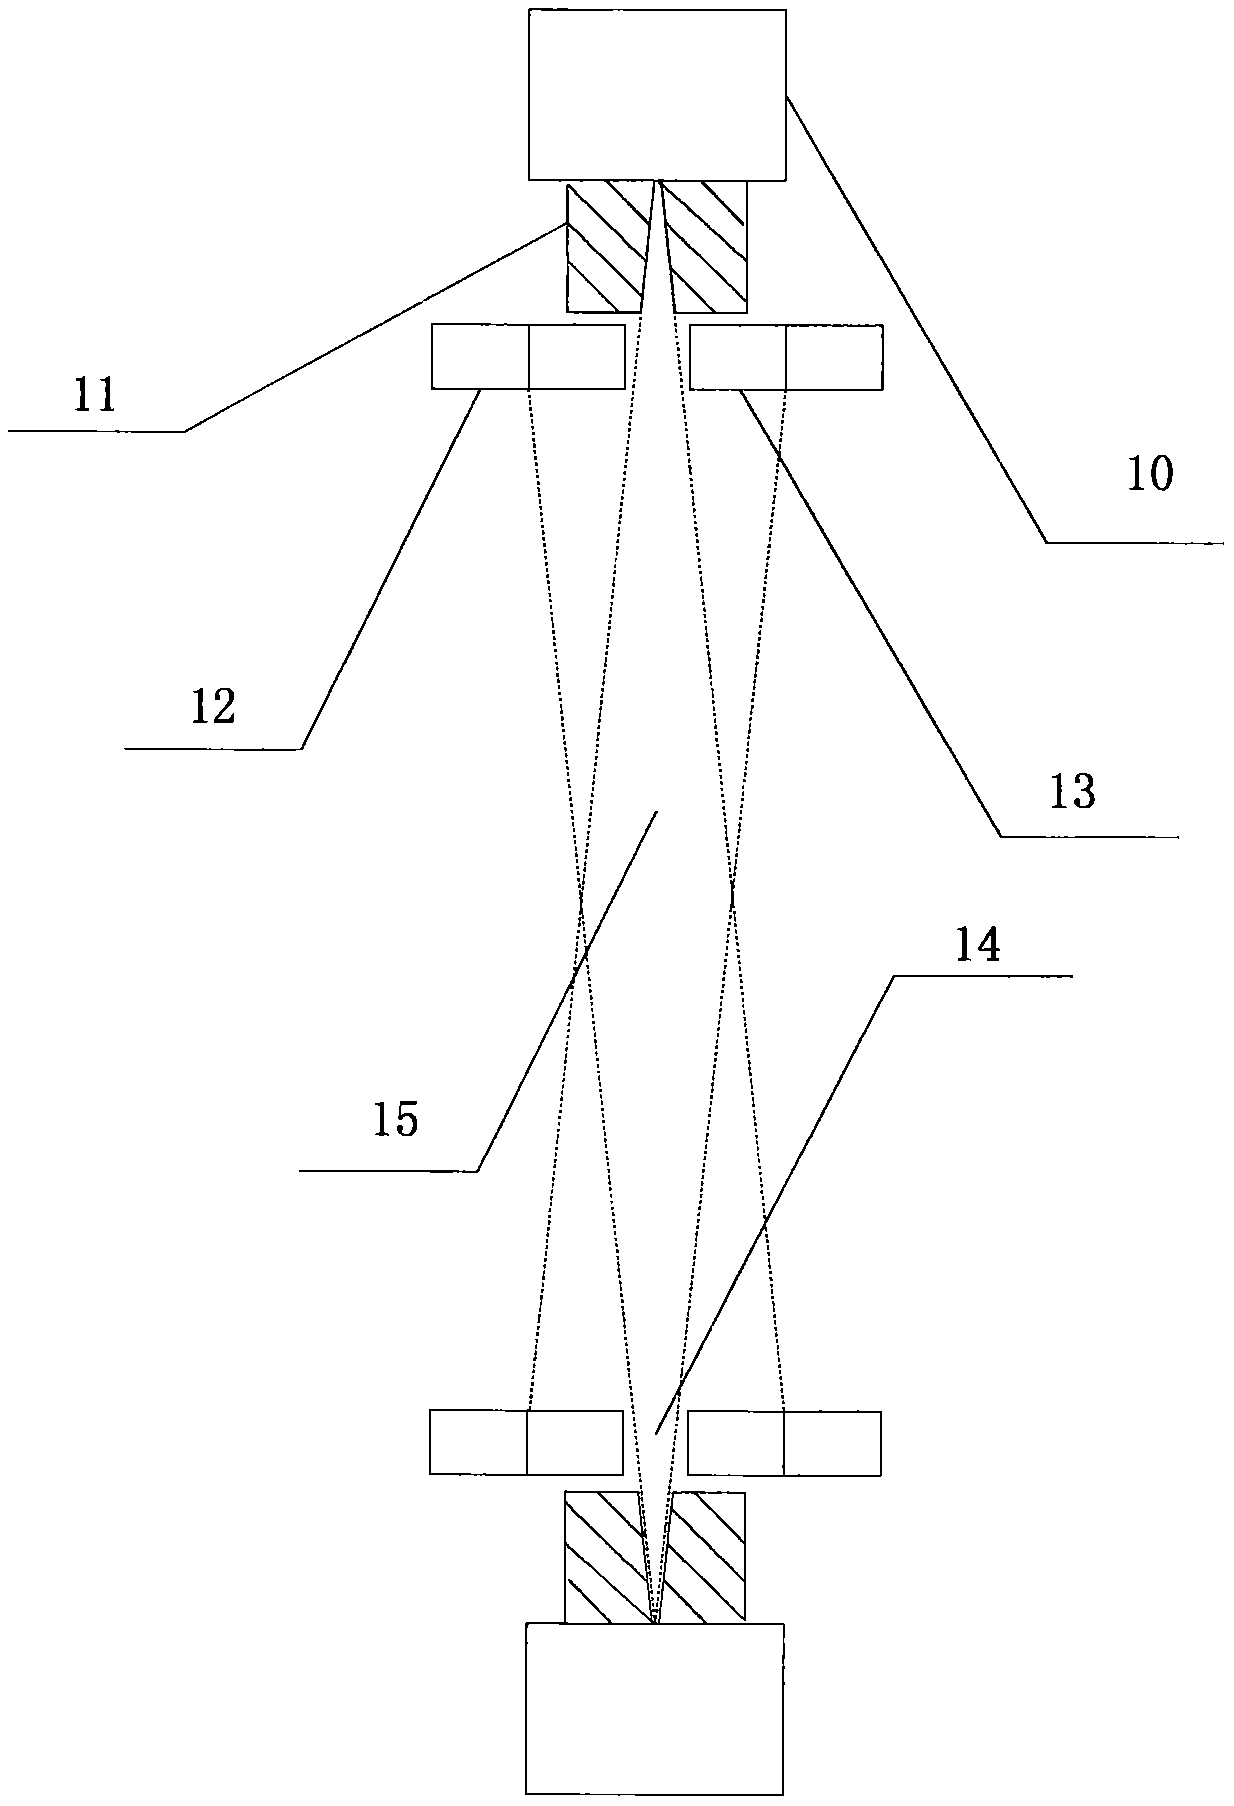 Non-rotary computer tomography imaging device and method